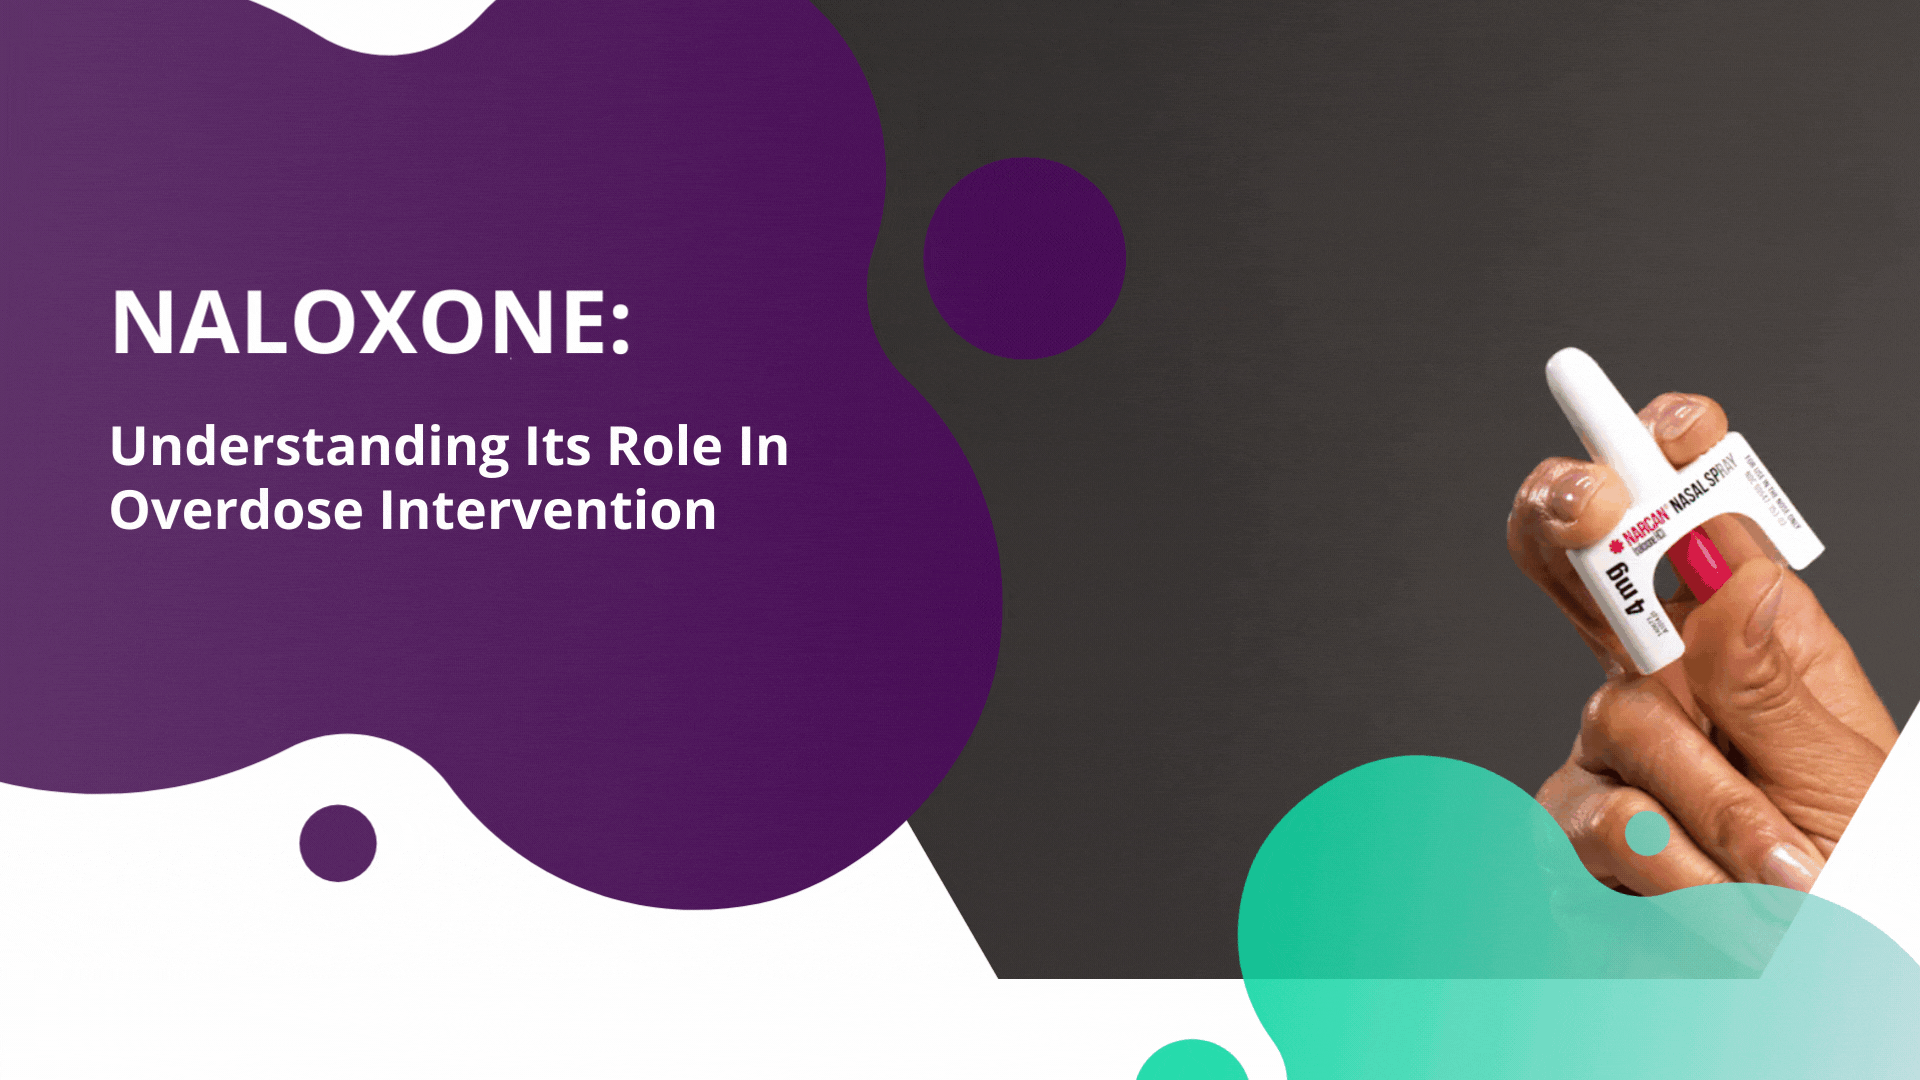 Naloxone: Understanding Its Role In Overdose Intervention